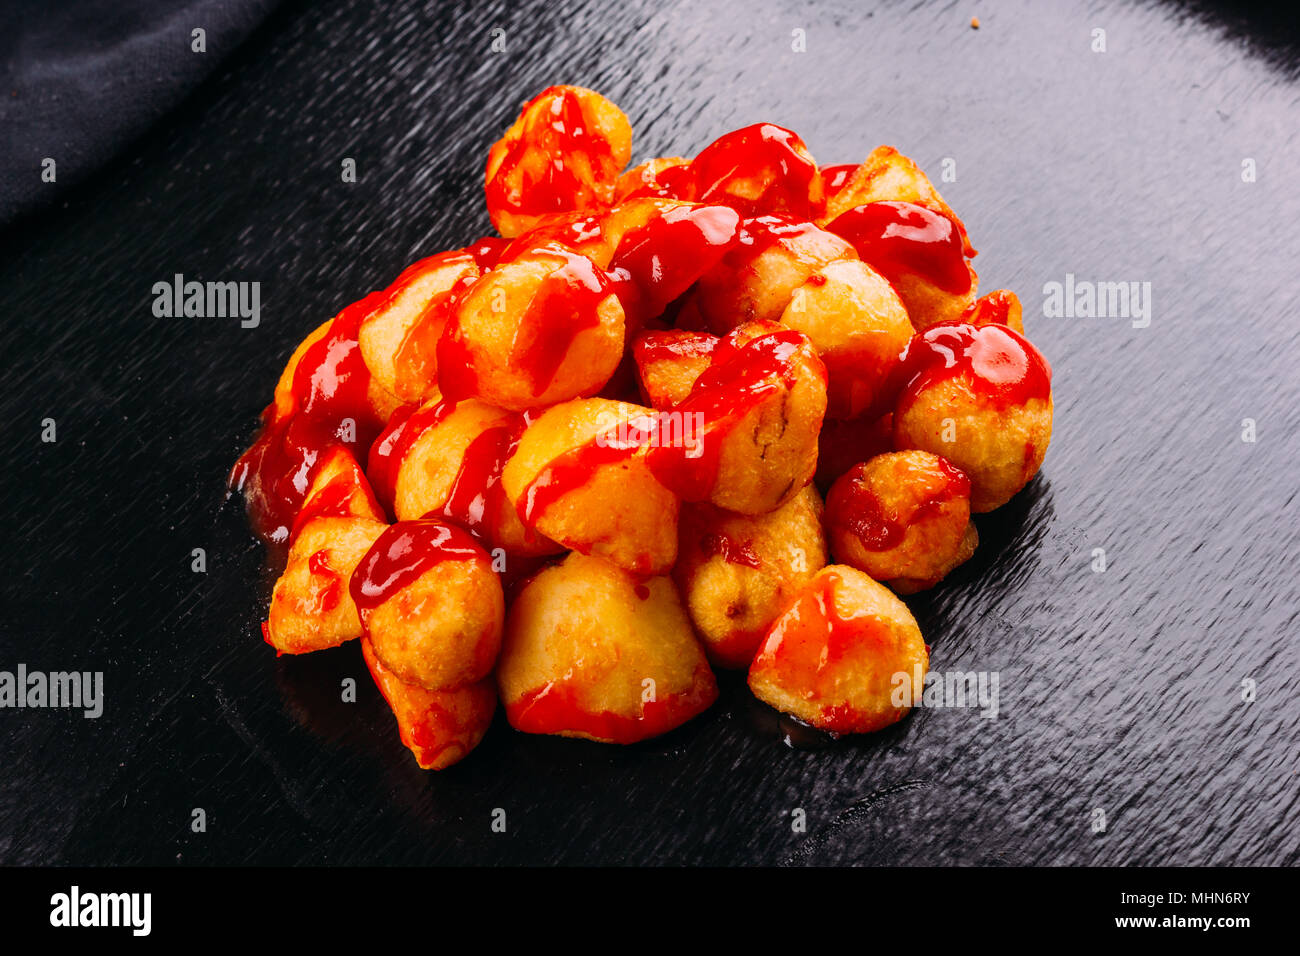 Typical spanish food, patatas bravas, fried potatoes with a hot sauce, on a dark background Stock Photo